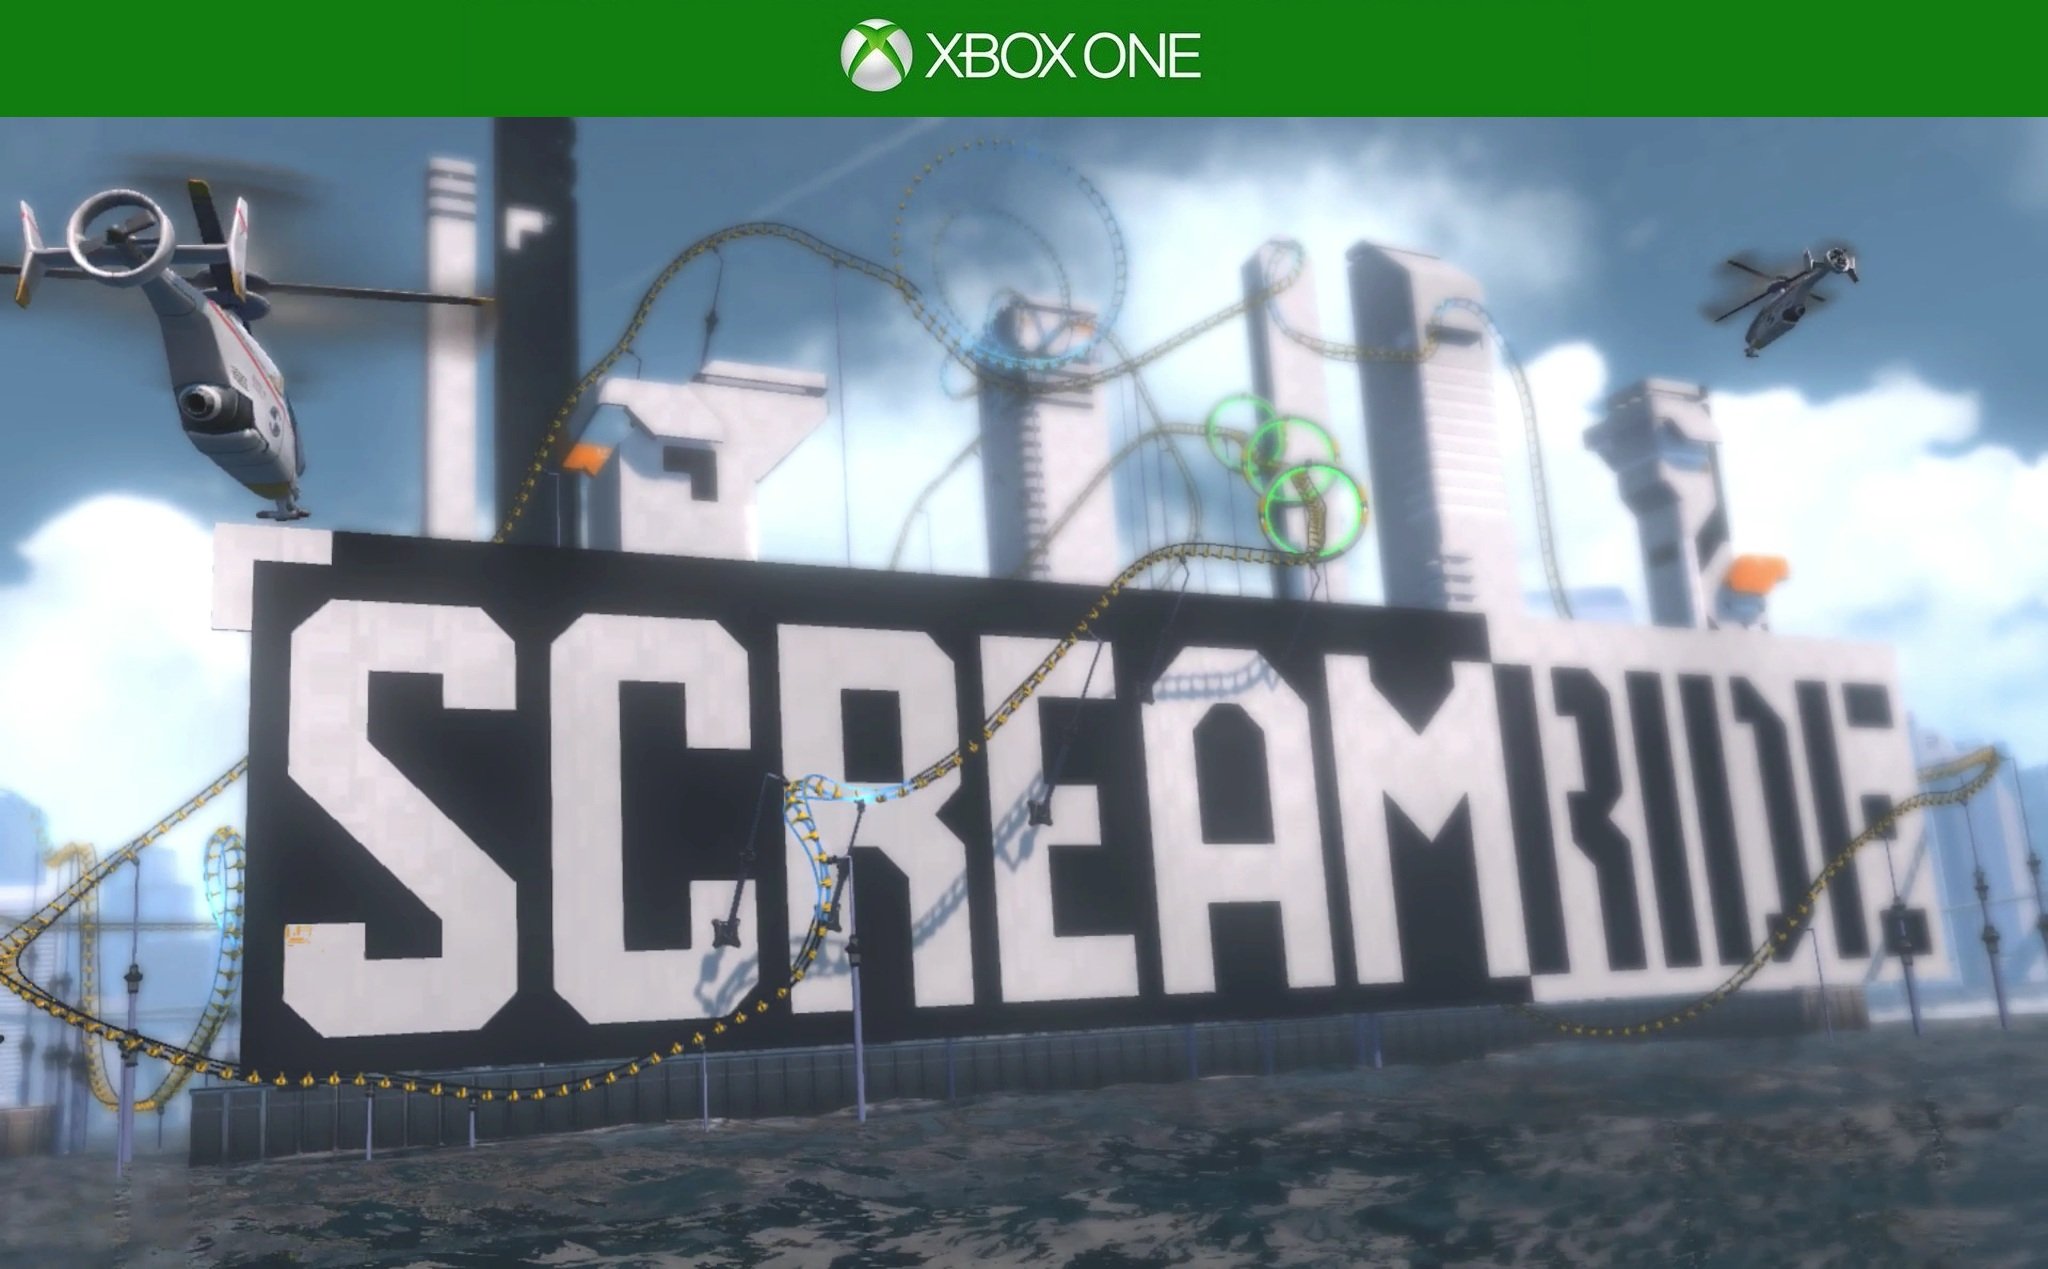 ScreamRide review: Build, ride, and break roller coasters in this Xbox  exclusive game | Windows Central